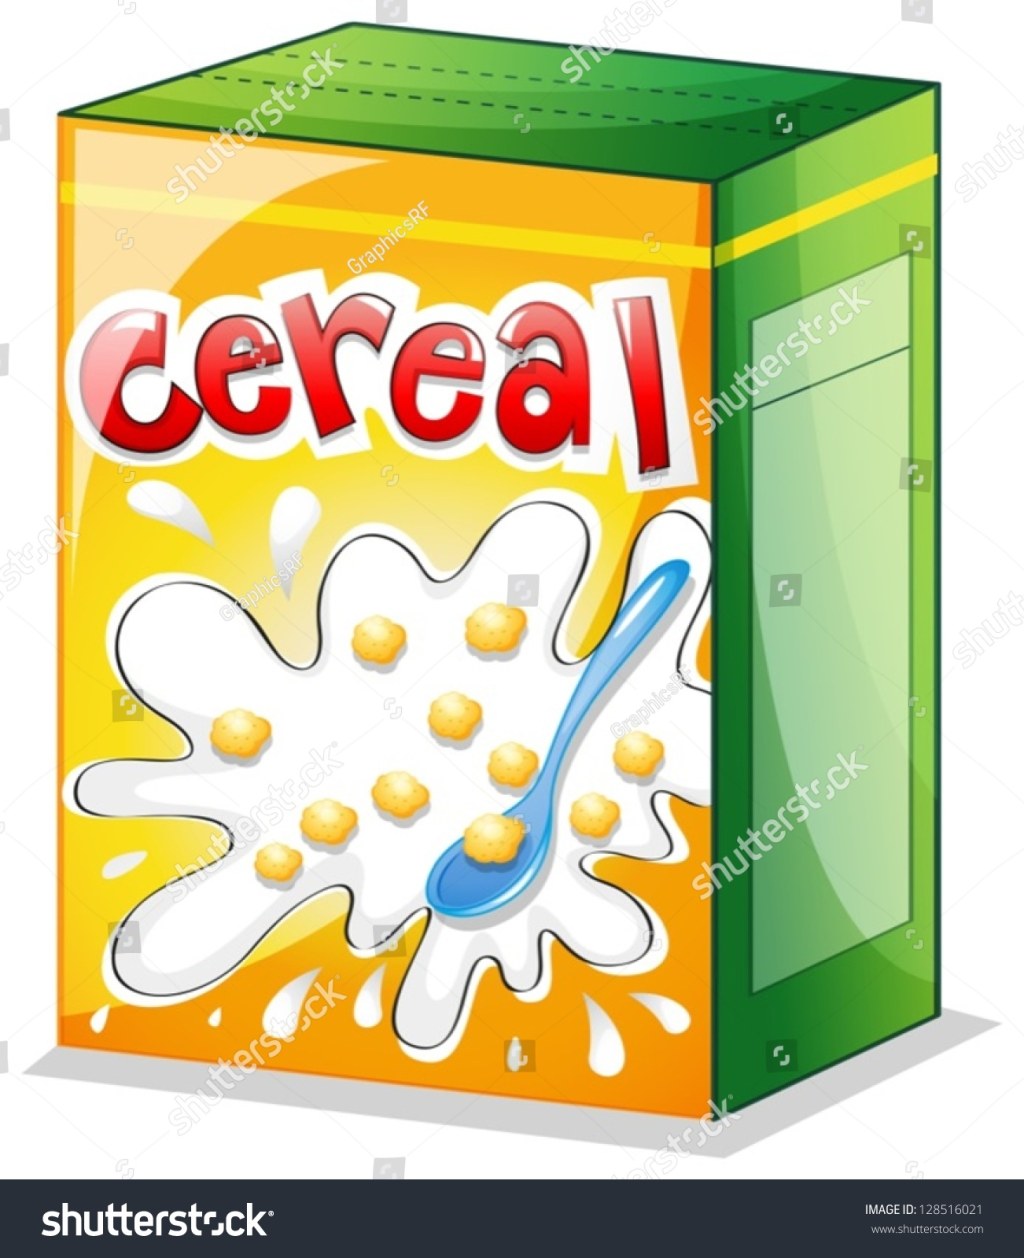 Picture of: , Cartoon Cereal Box Images, Stock Photos & Vectors  Shutterstock